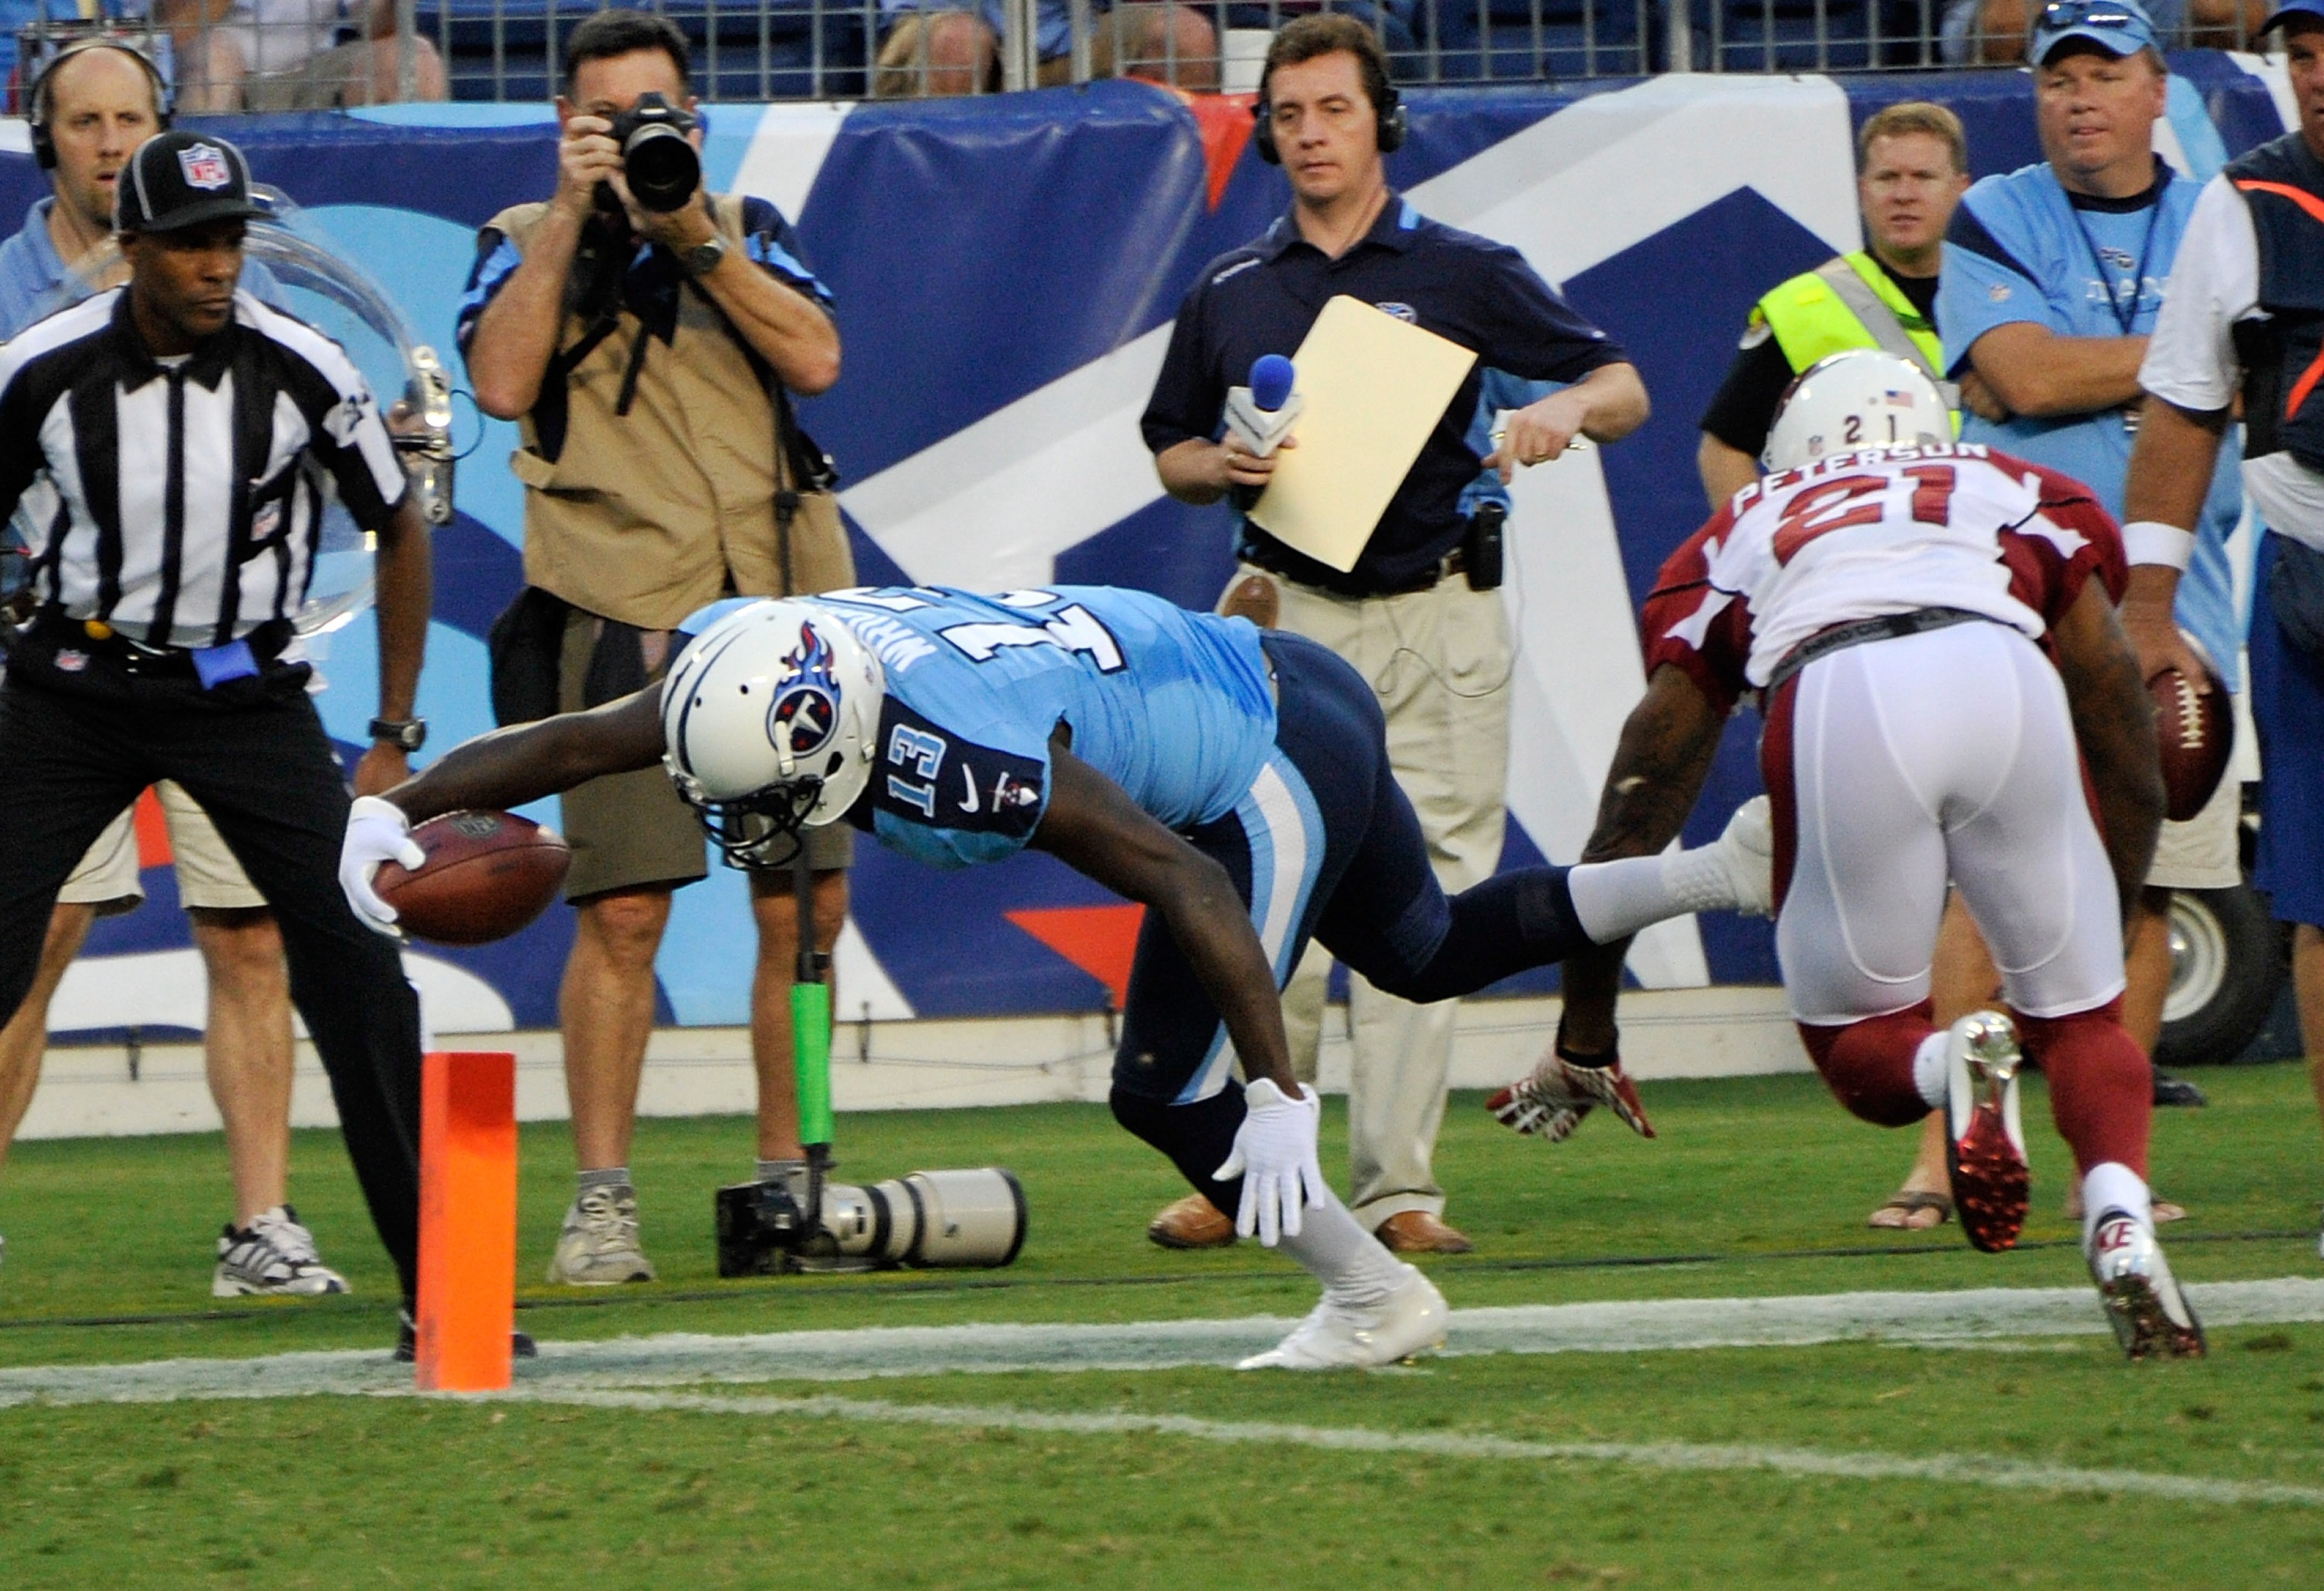 NASHVILLE, TN - AUGUST 23:  Kendall Wright #13 of the Tennessee Titans dives past Patrick Peterson #21 of the Arizona Cardinals for a touchdown at LP Field on August 23, 2012 in Nashville, Tennessee.  (Photo by Frederick Breedon/Getty Images)